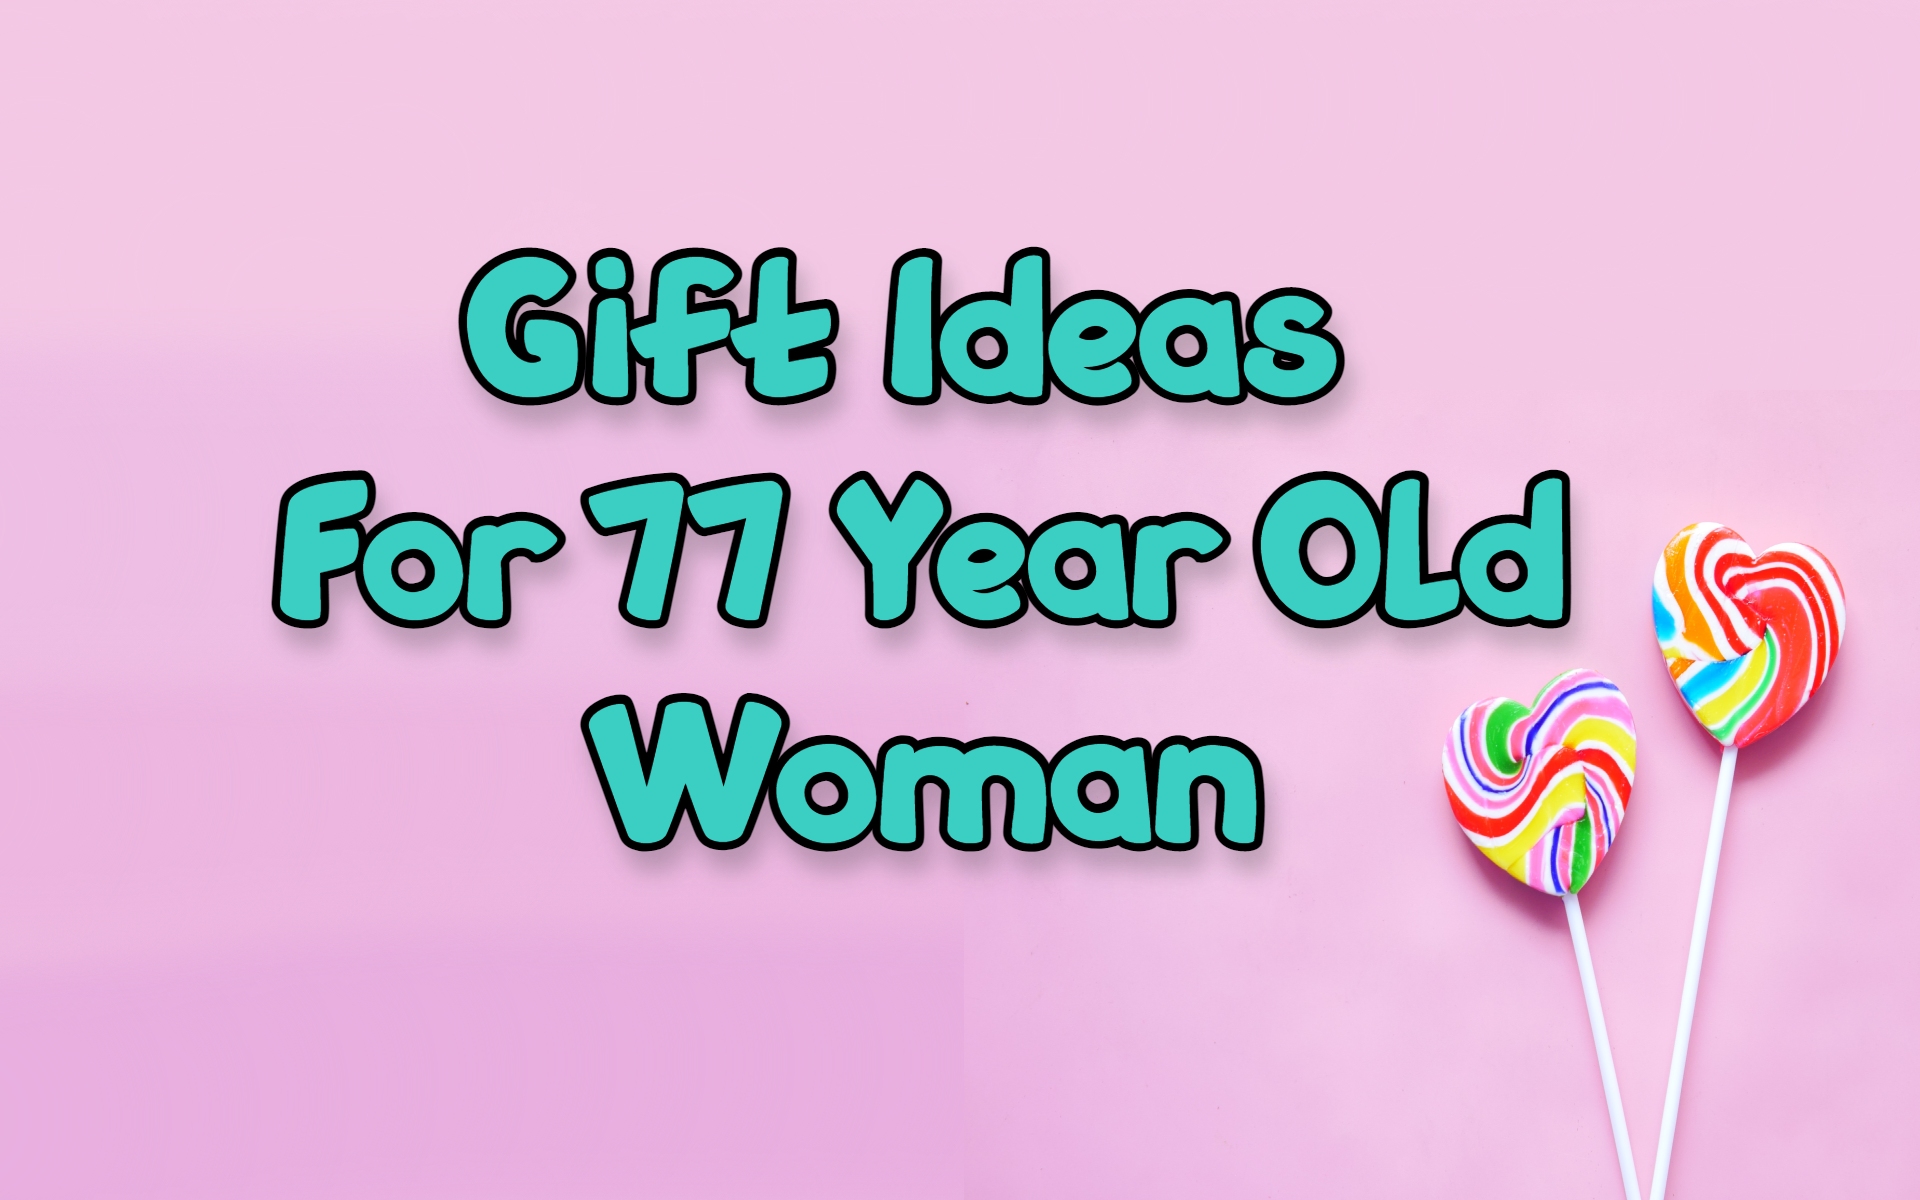 Cover image of gift ideas for 77-year-old woman by Giftsedge